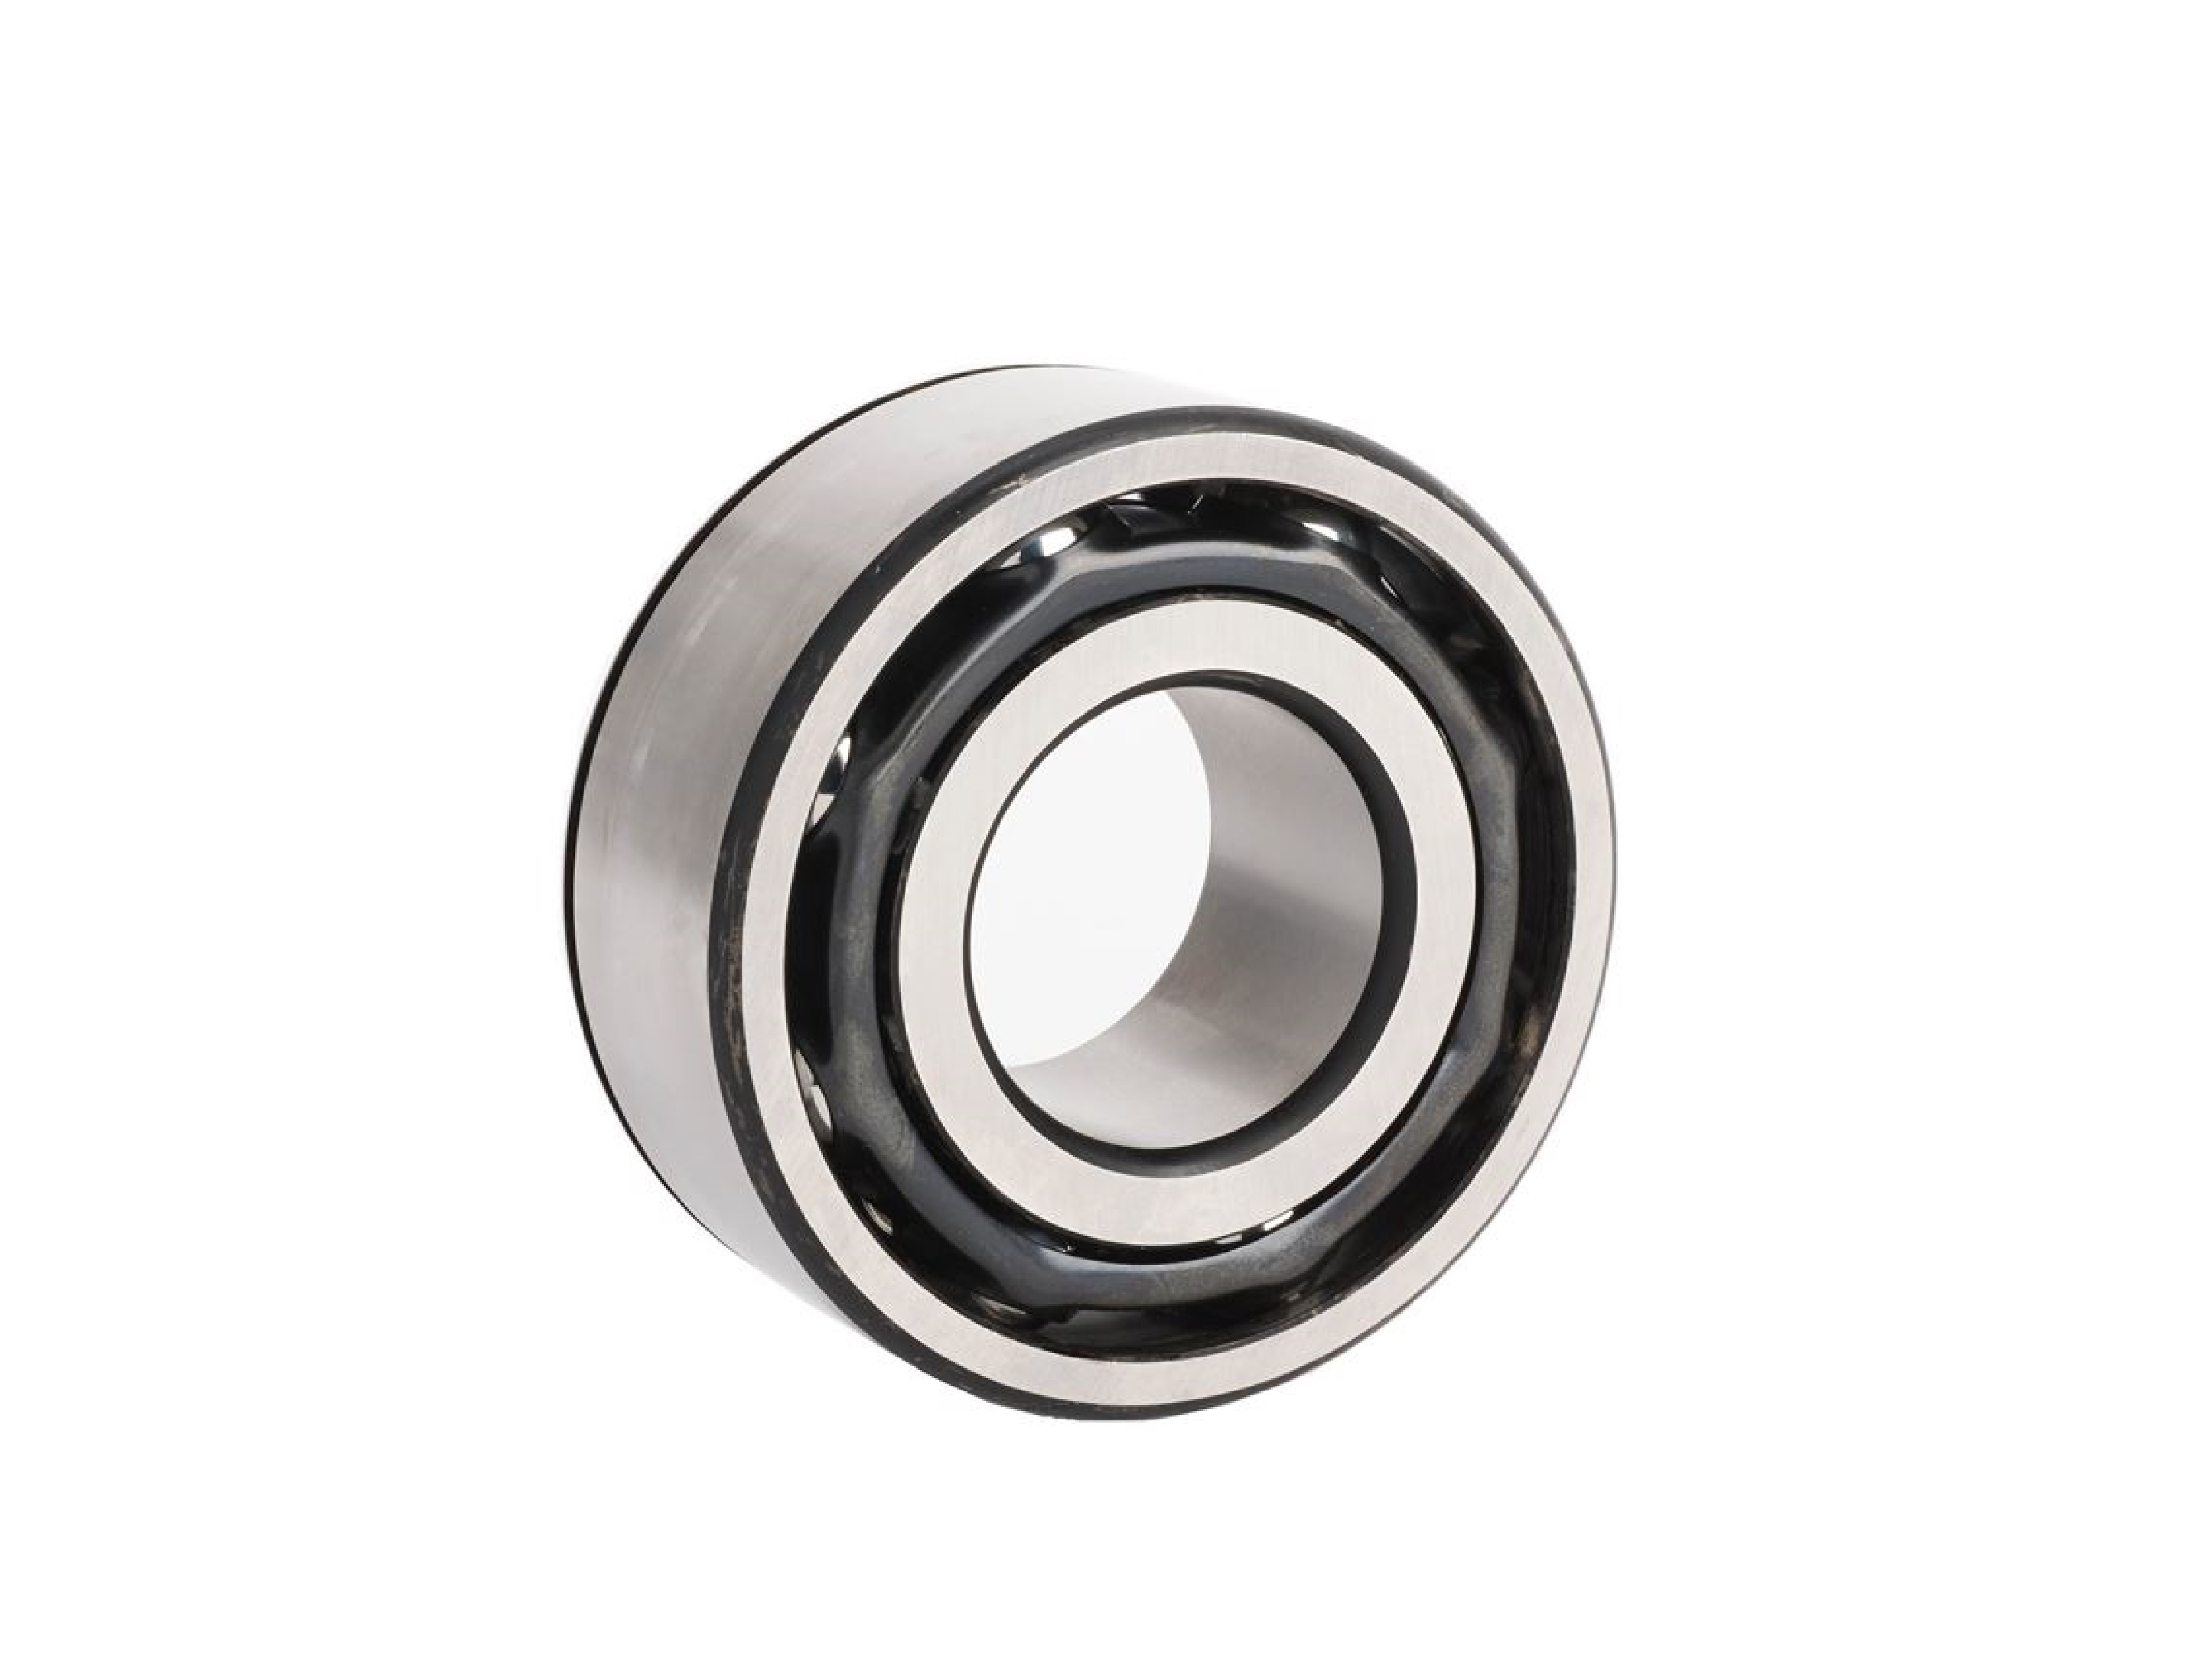 SKF Explorer 3206 A-2rs1 Double Row Angular Contact Bearing 30mm Bore 62mm OD for sale online 